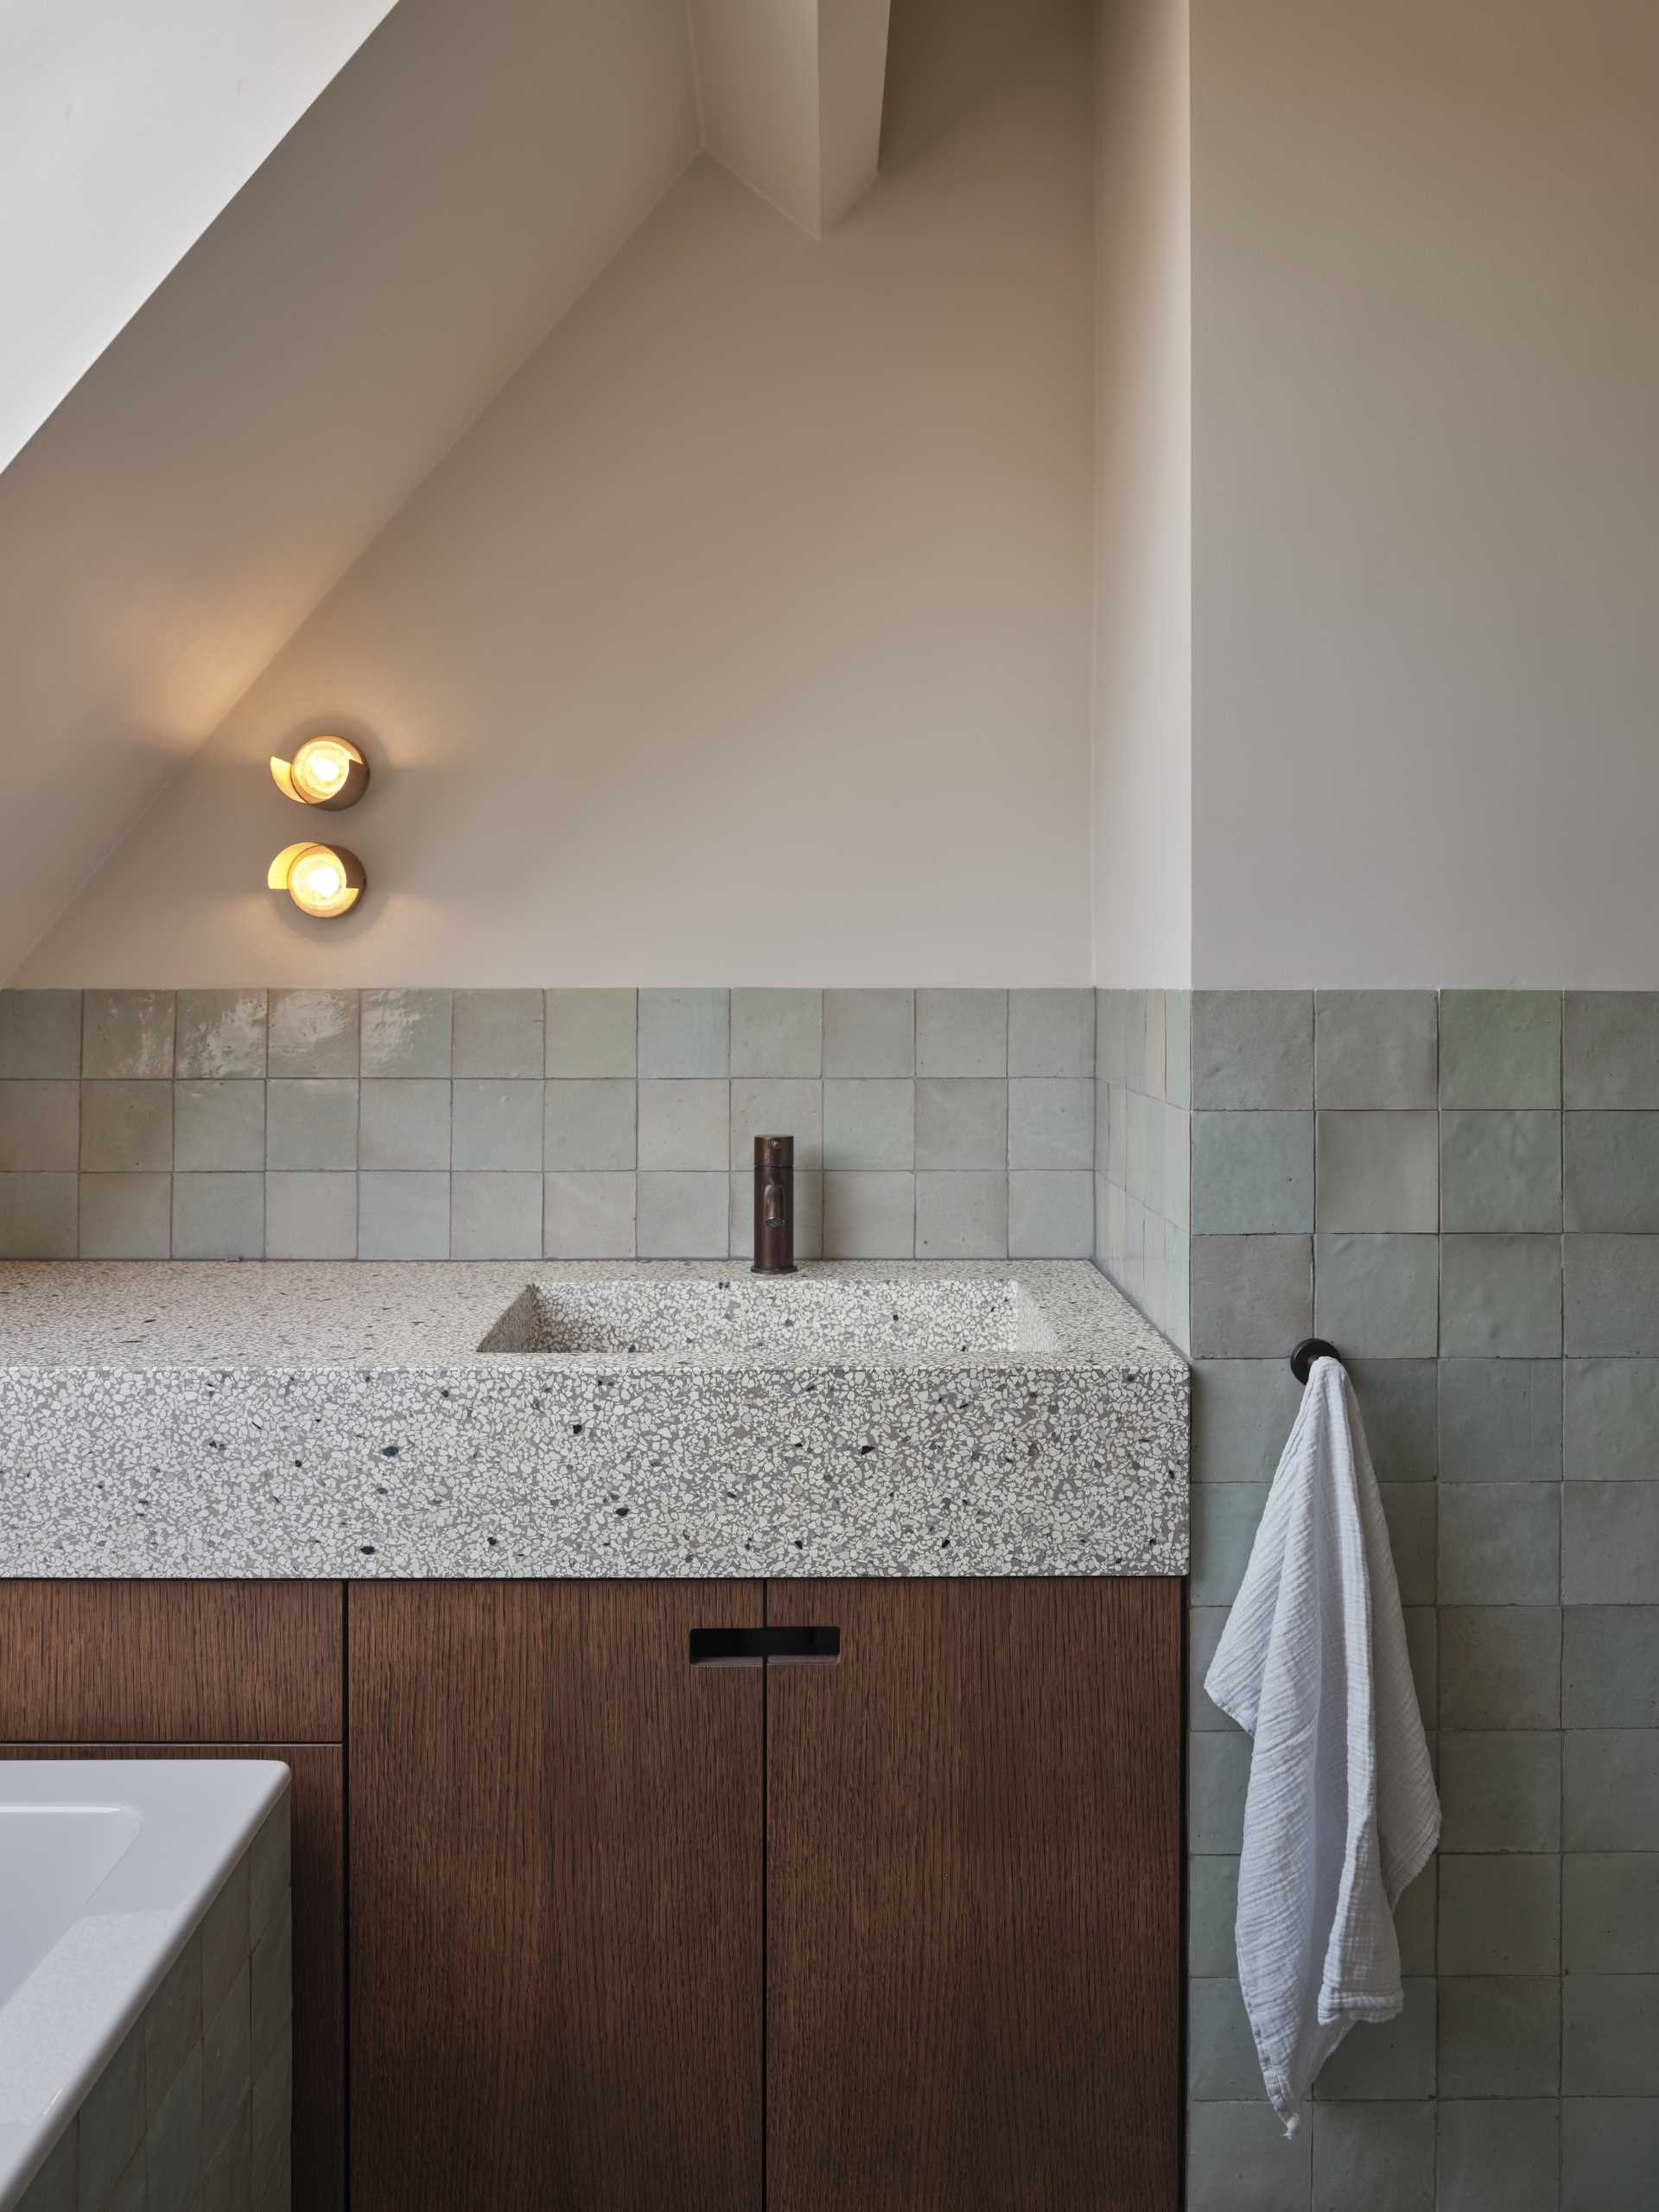 In the children’s bathroom, a more outspoken green color palette was applied over a range of tiles and a terrazzo sink.